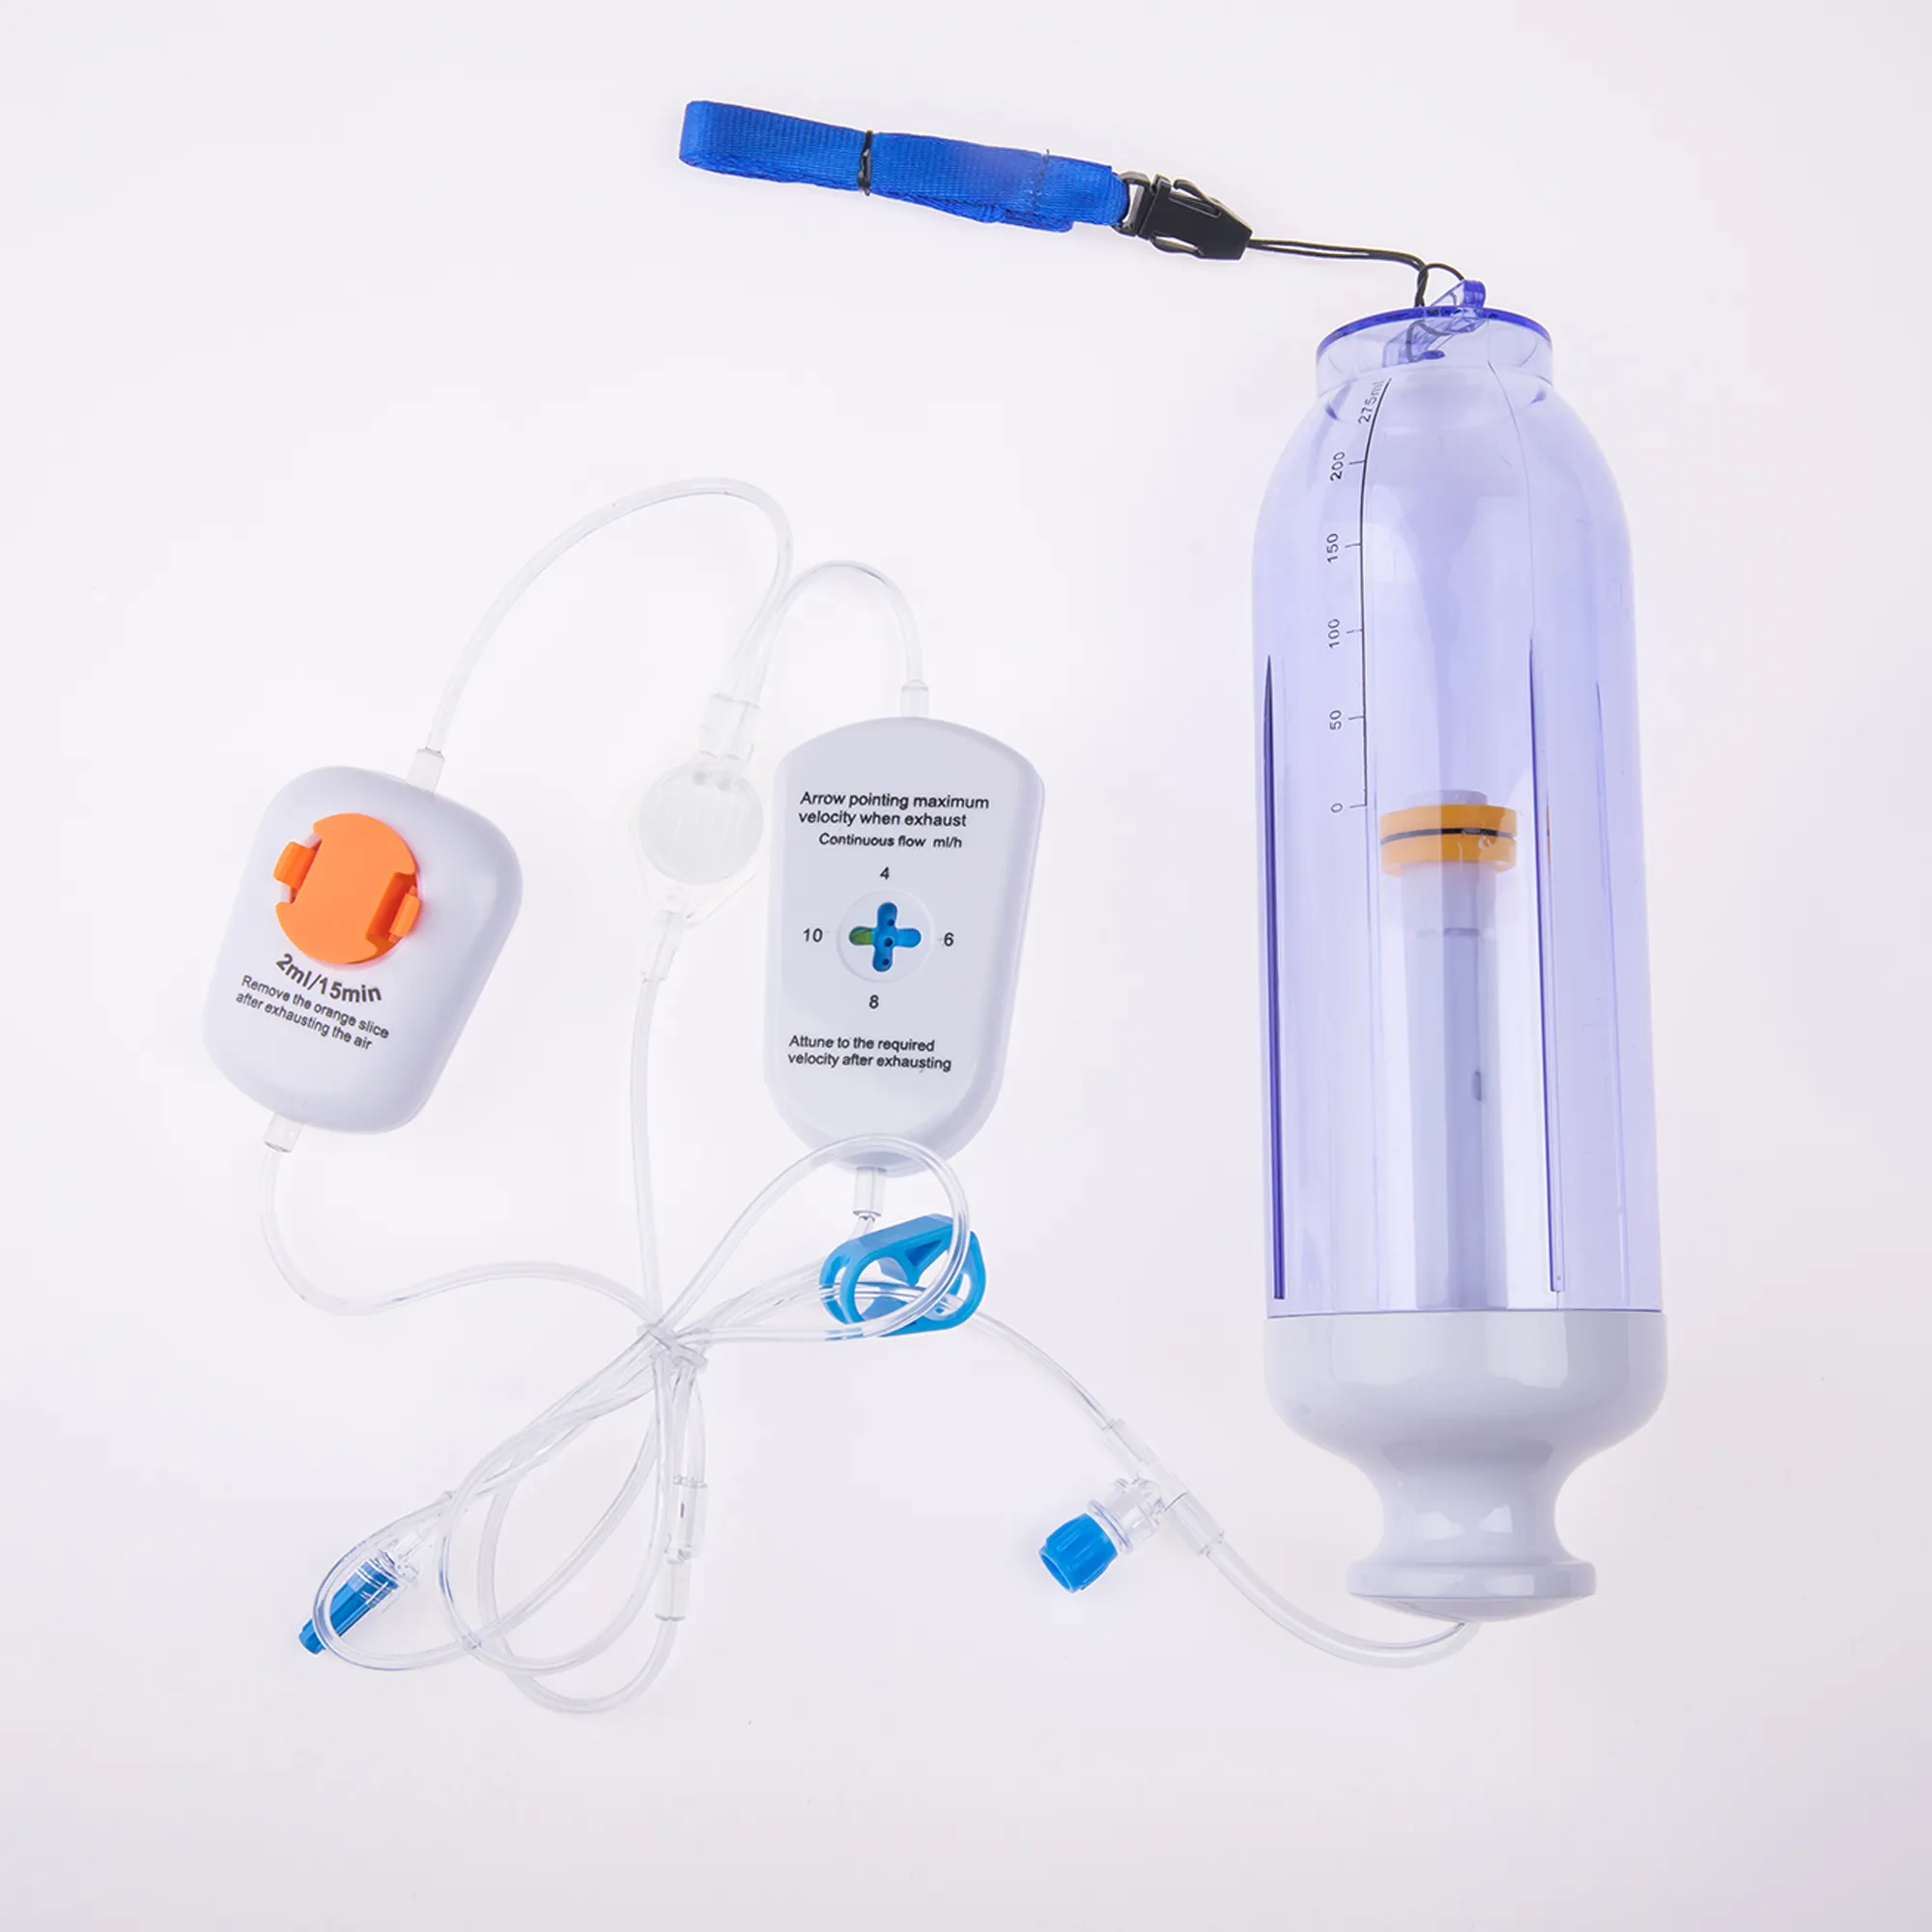 Tuoren disposable infusion pump soft elastomeric infusion pump for hospital